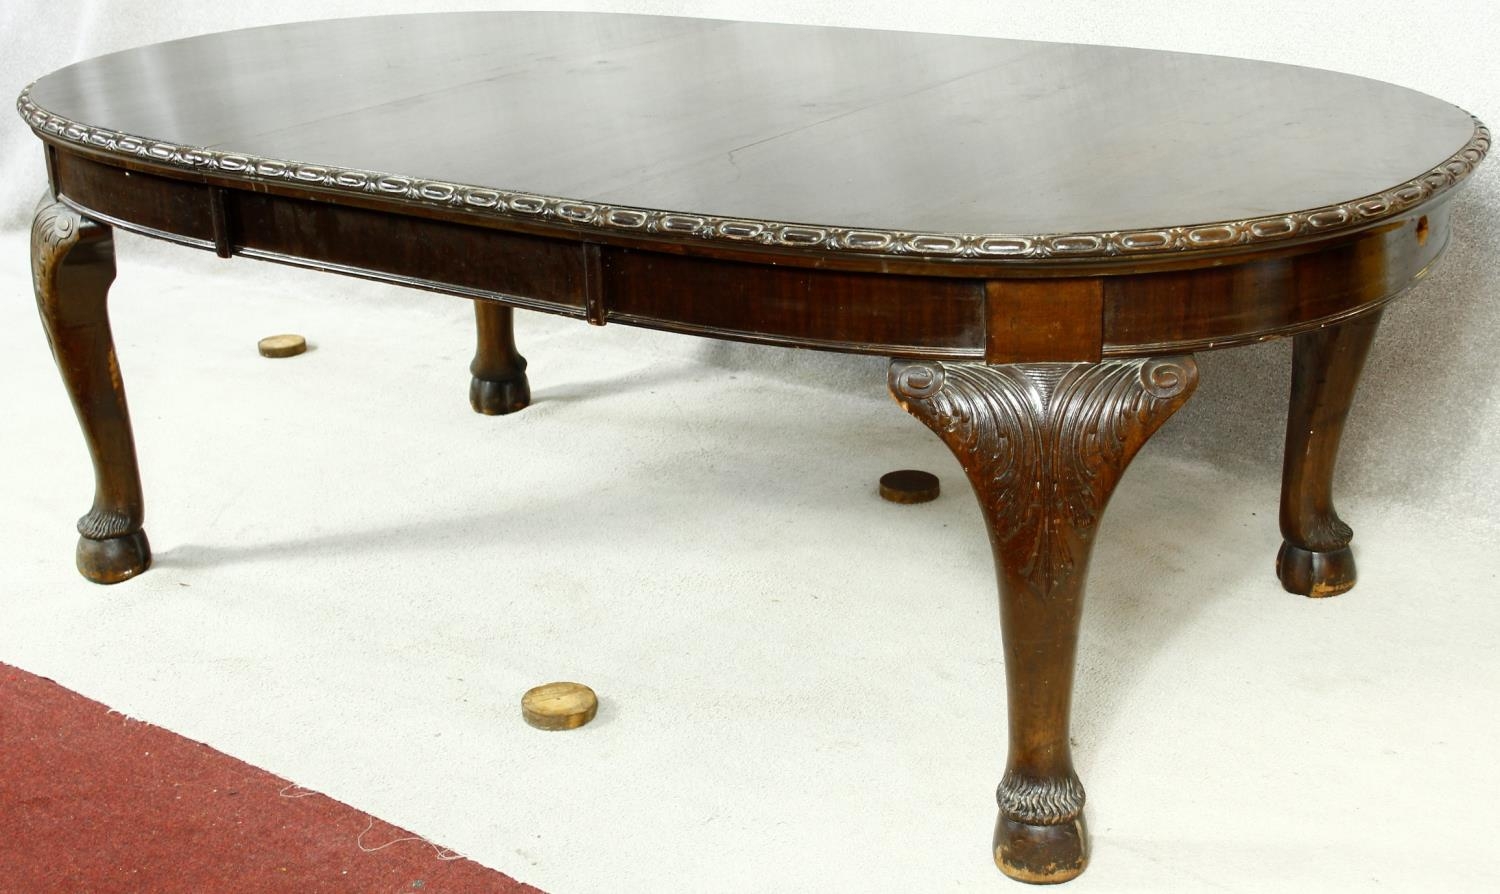 An early 20th century mahogany Georgian style dining table with extra leaf and wind out mechanism on - Image 5 of 7